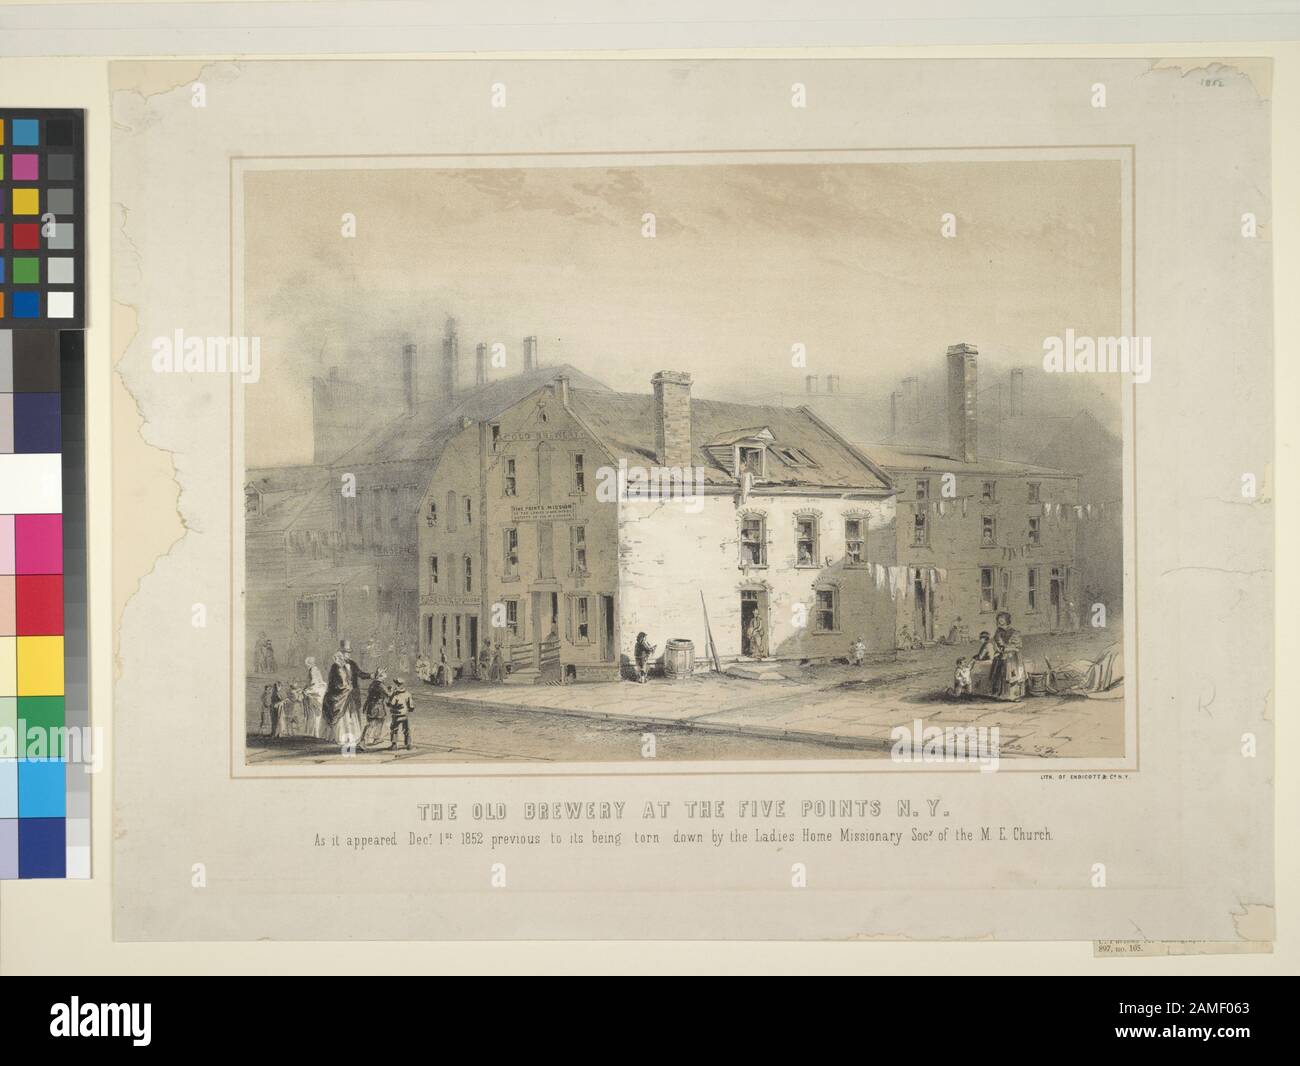 The old brewery at the Five Points, NY  Citation/Reference: Eno 288 Remainder of title: As it appeared Decr. 1st 1852 previous to its being torn down by the Ladies' Home Missionary Socy. of the M.E. Church.; The old brewery at the Five Points, N.Y. Stock Photo